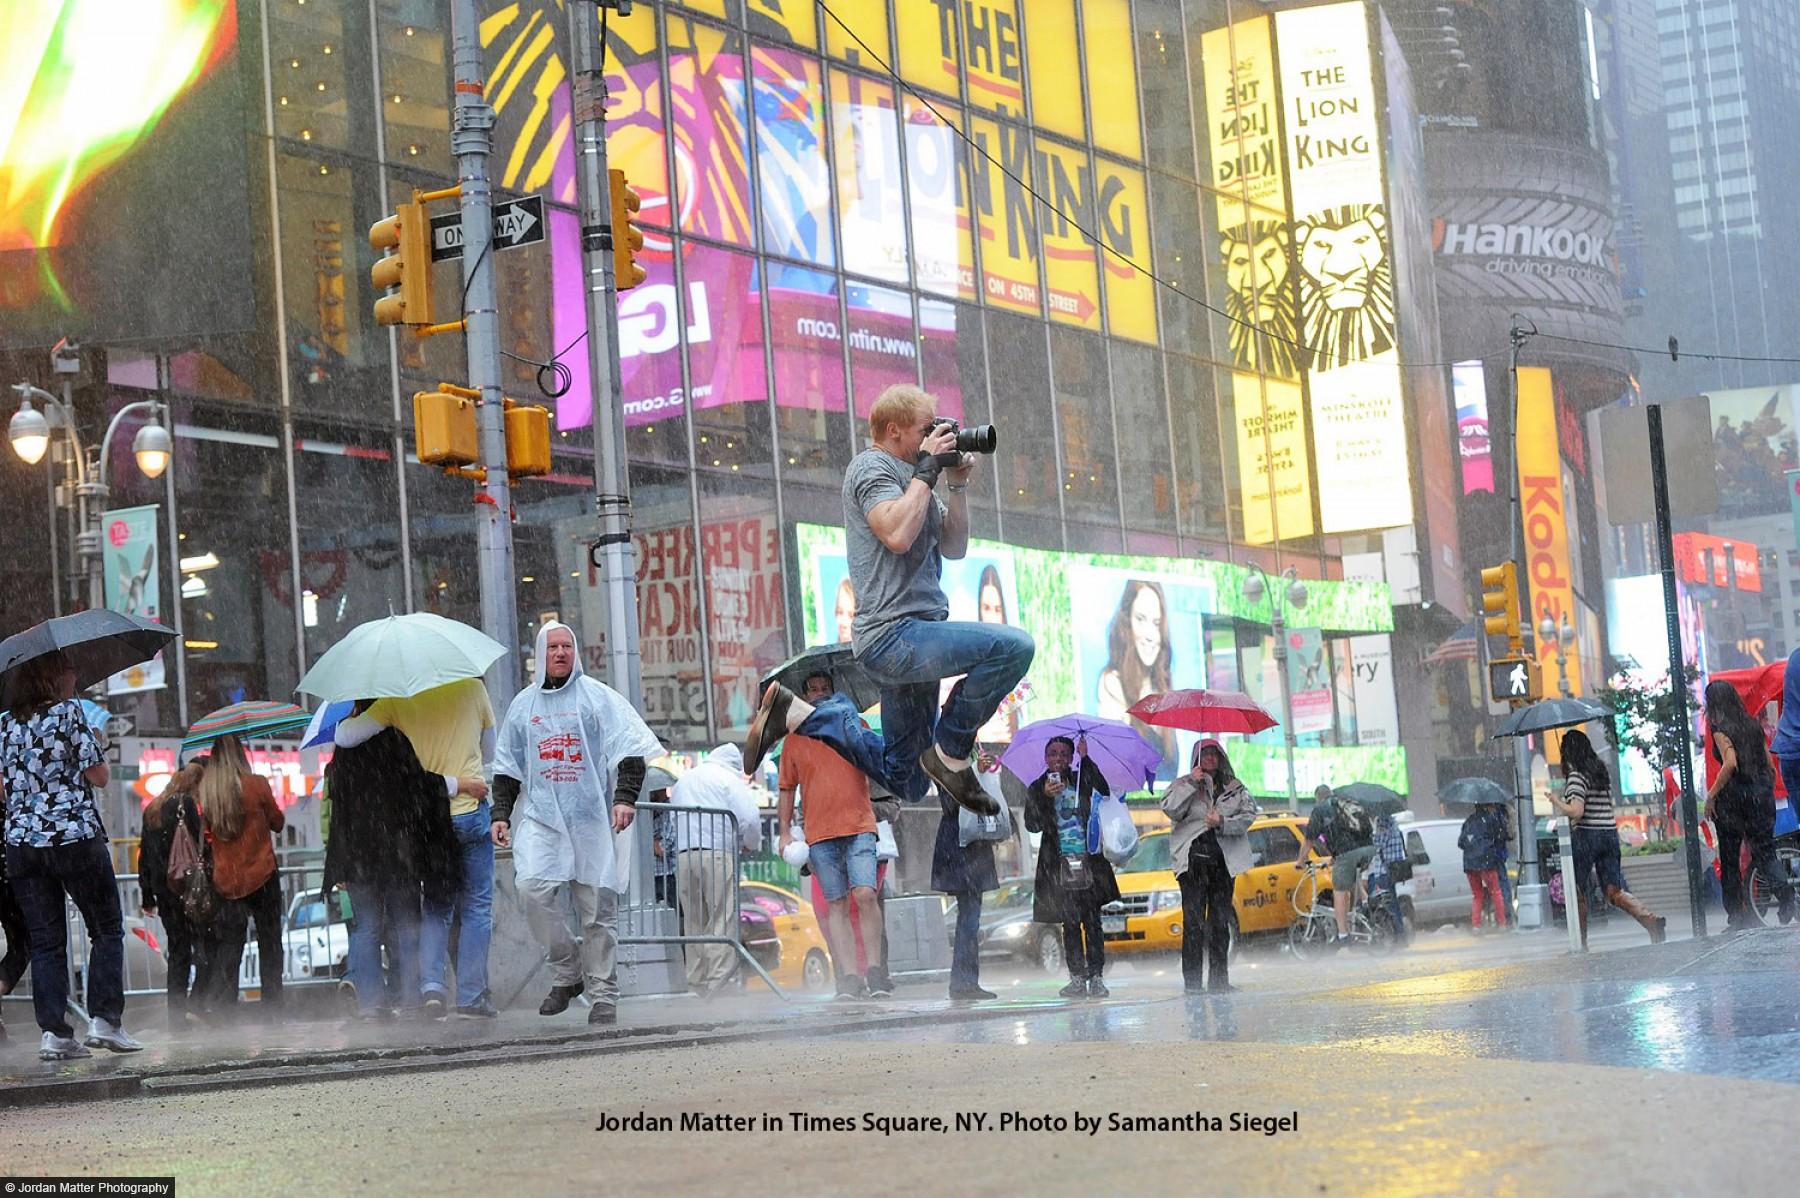 Author photo of Jordan Matter in Times Square by Samantha Siegel